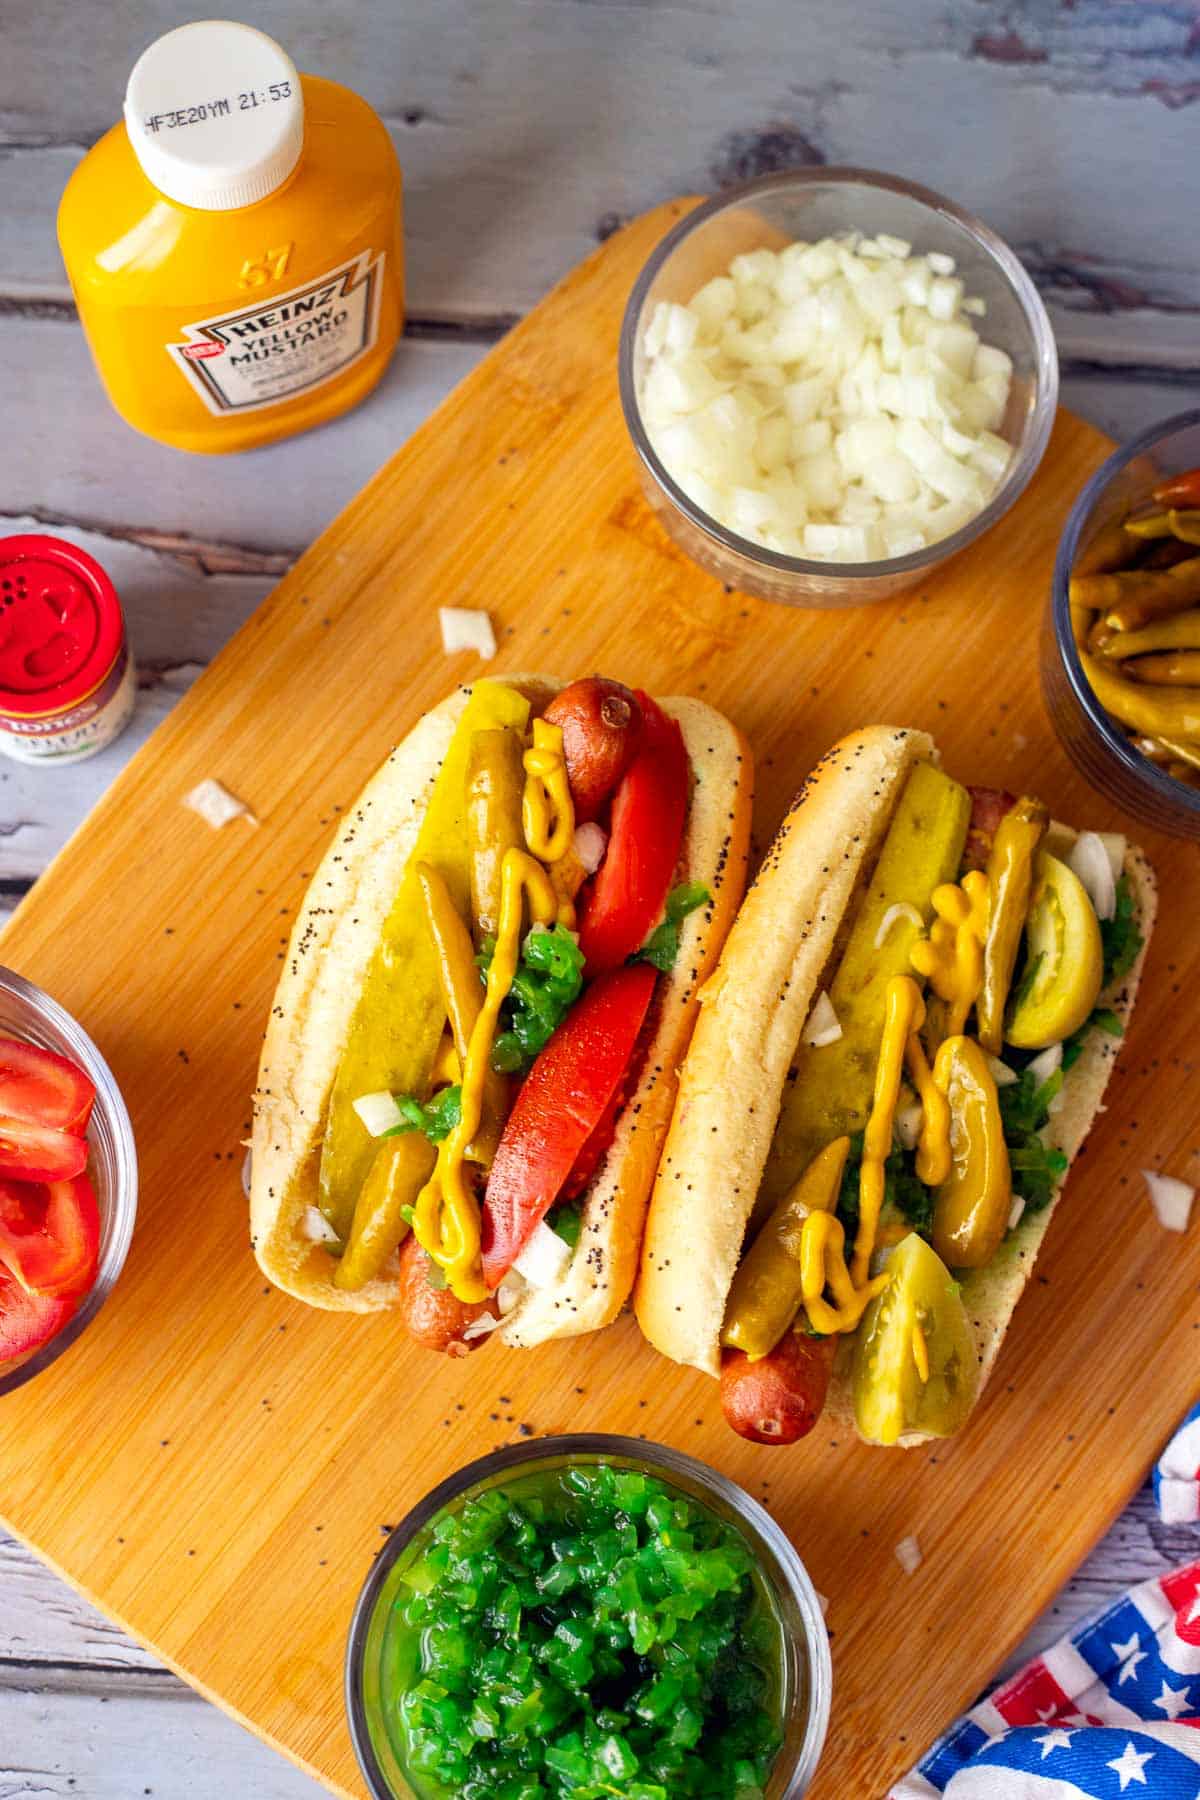 chicago dogs with diced onion, relish, mustard, and tomatoes 